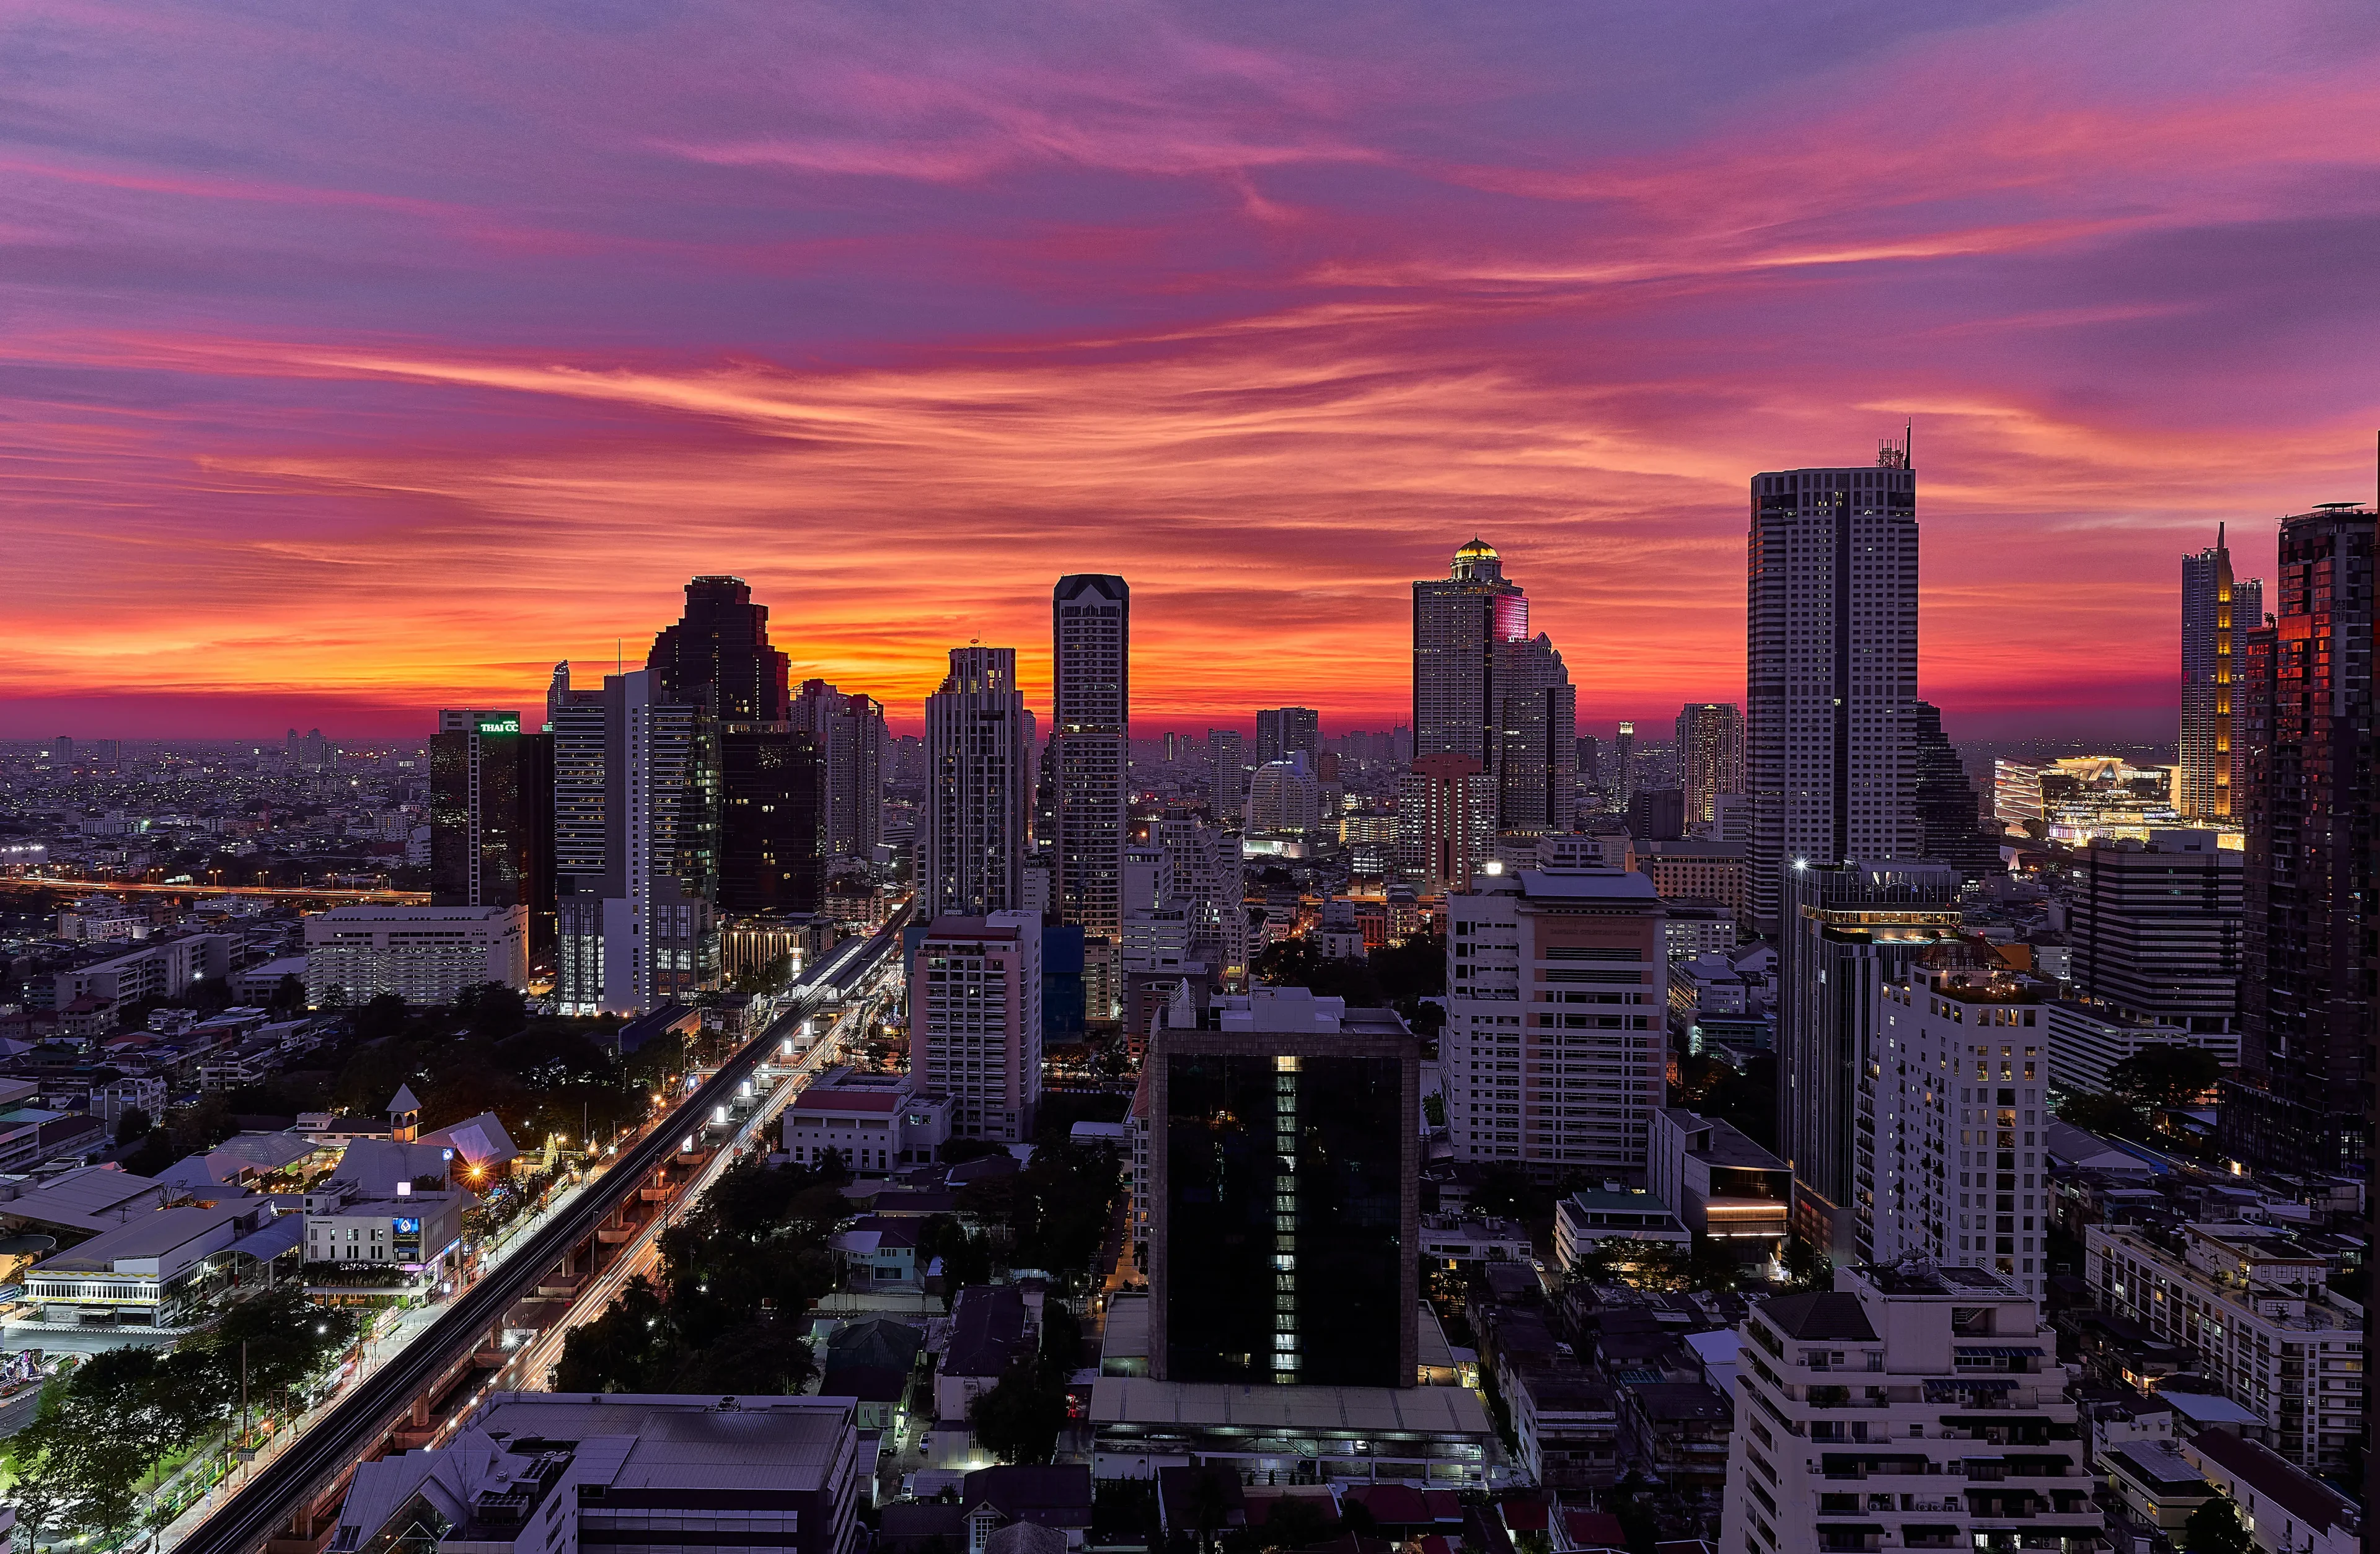 Sathorn, the business district in Bangkok